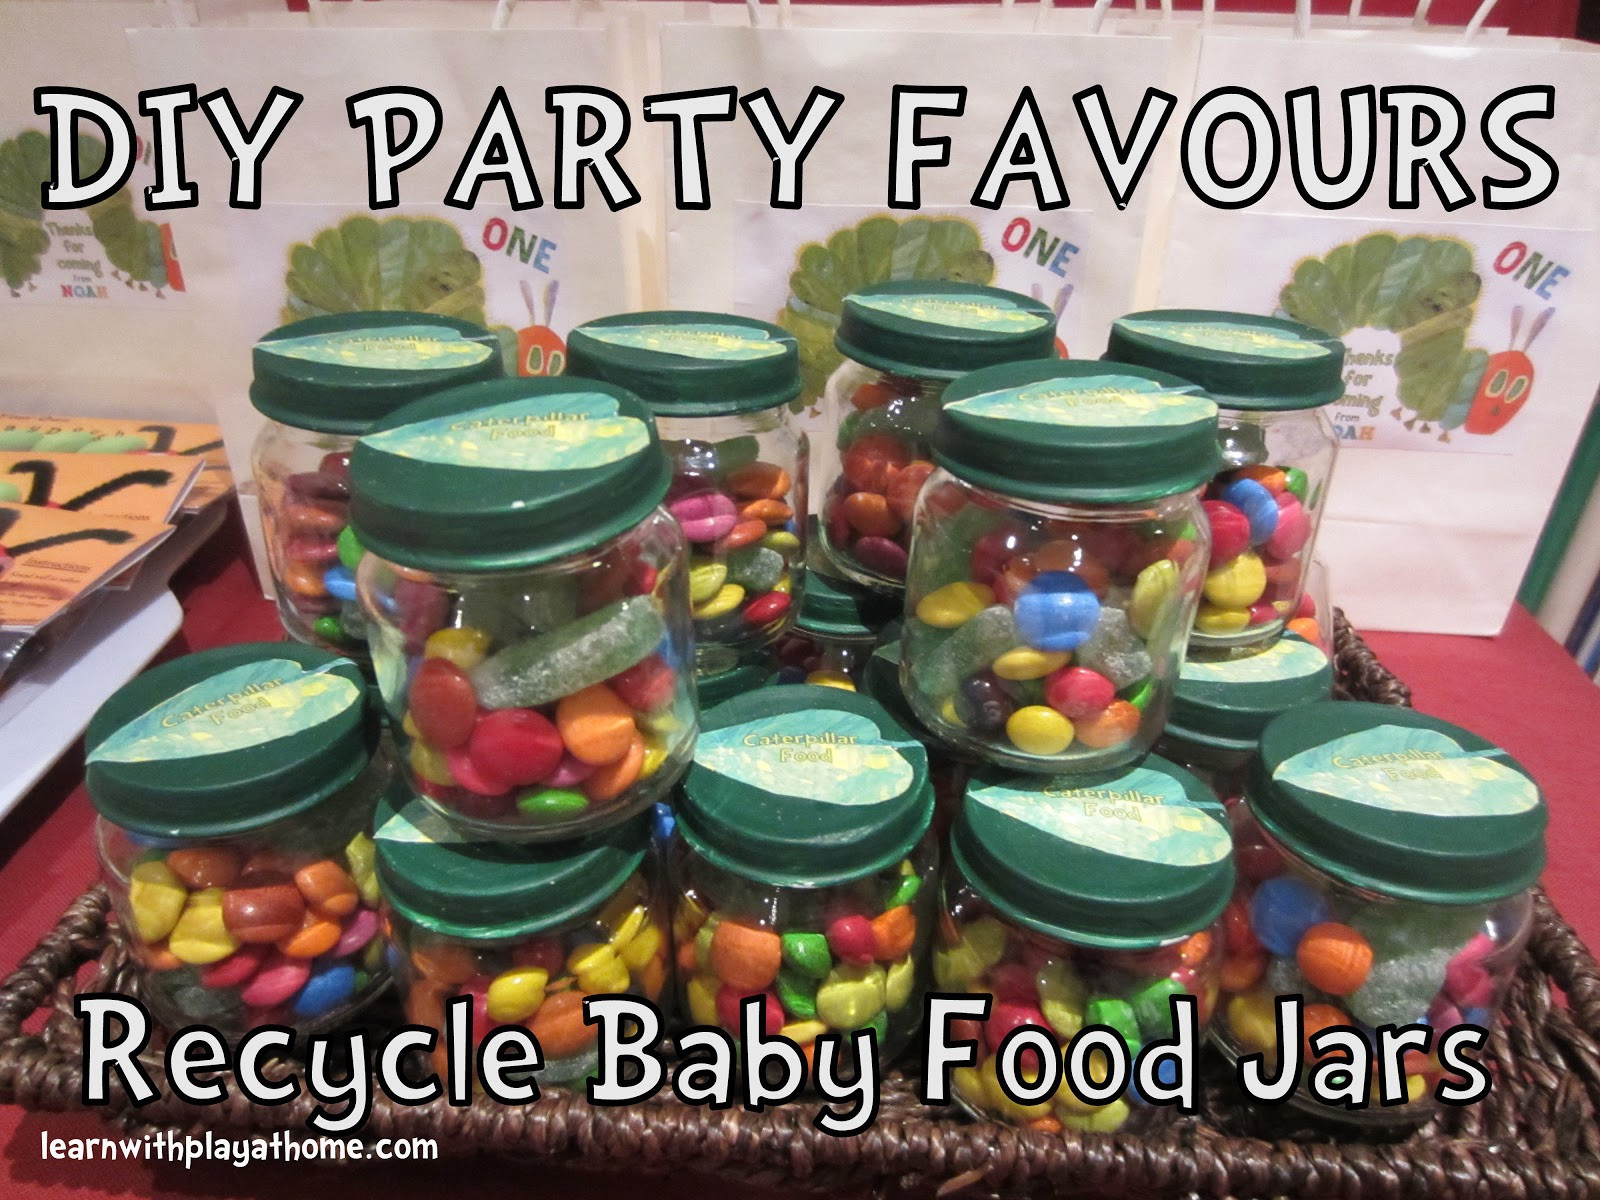 Best ideas about DIY Baby Food
. Save or Pin Learn with Play at Home DIY Party Favours Now.